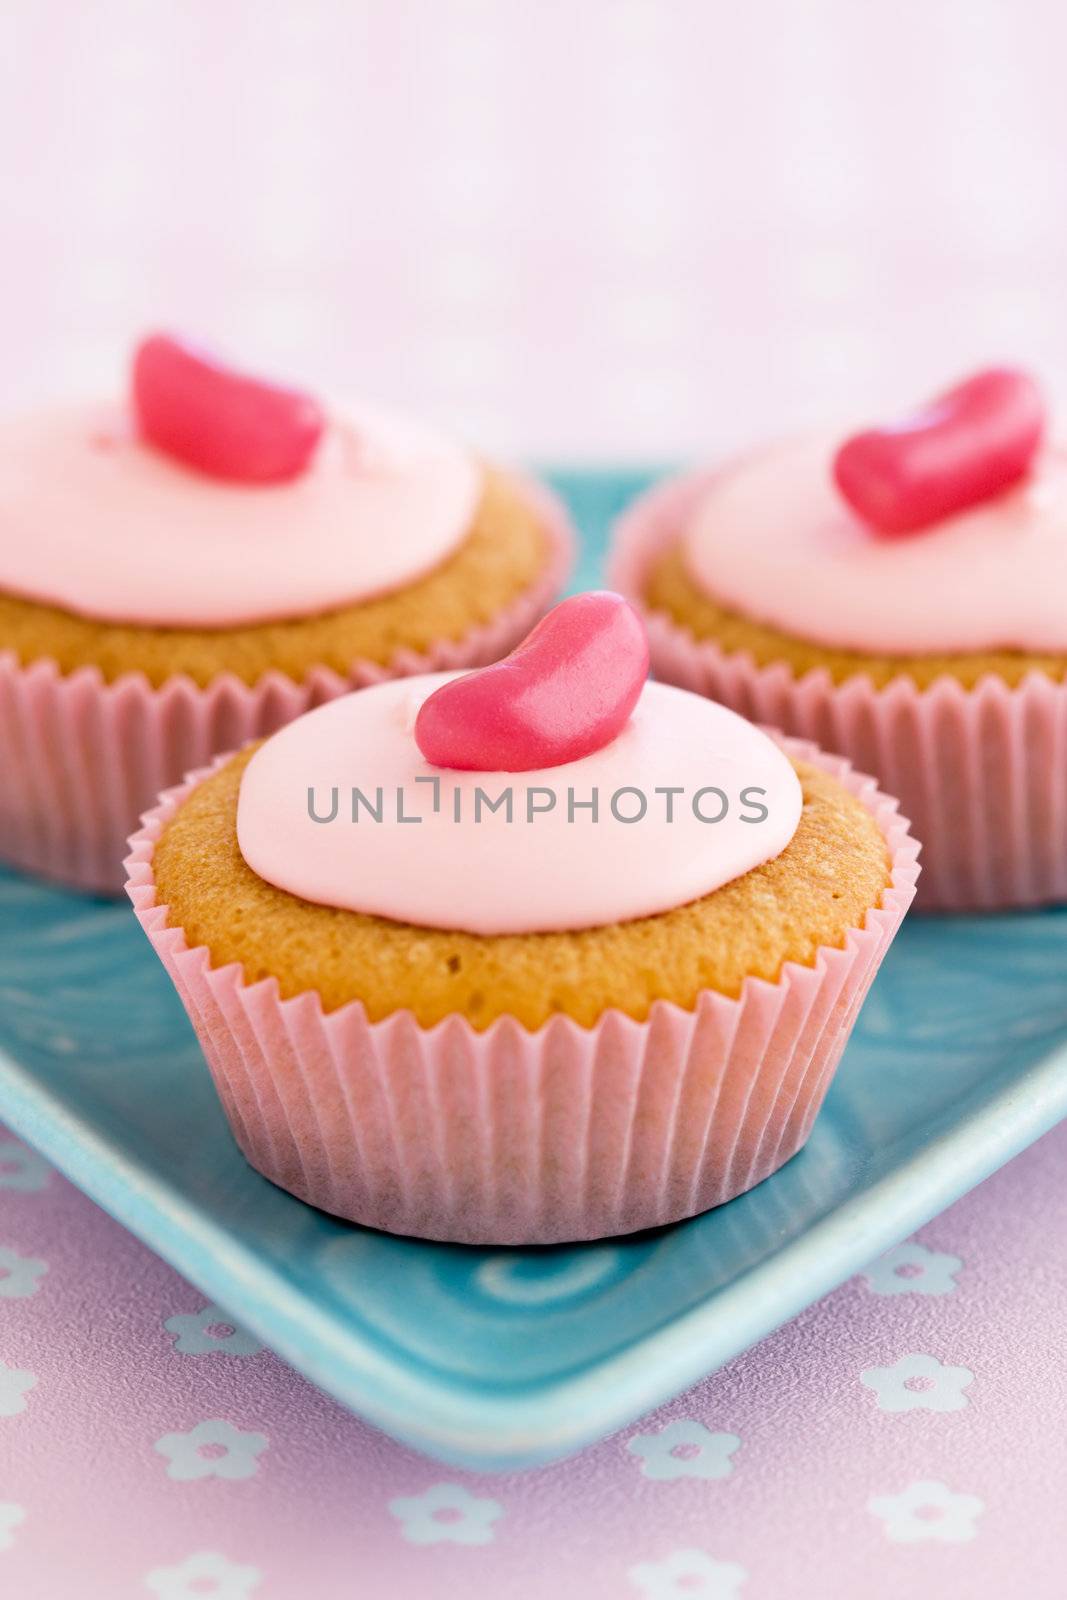 Trio of pink cupcakes decorated with jellybeans